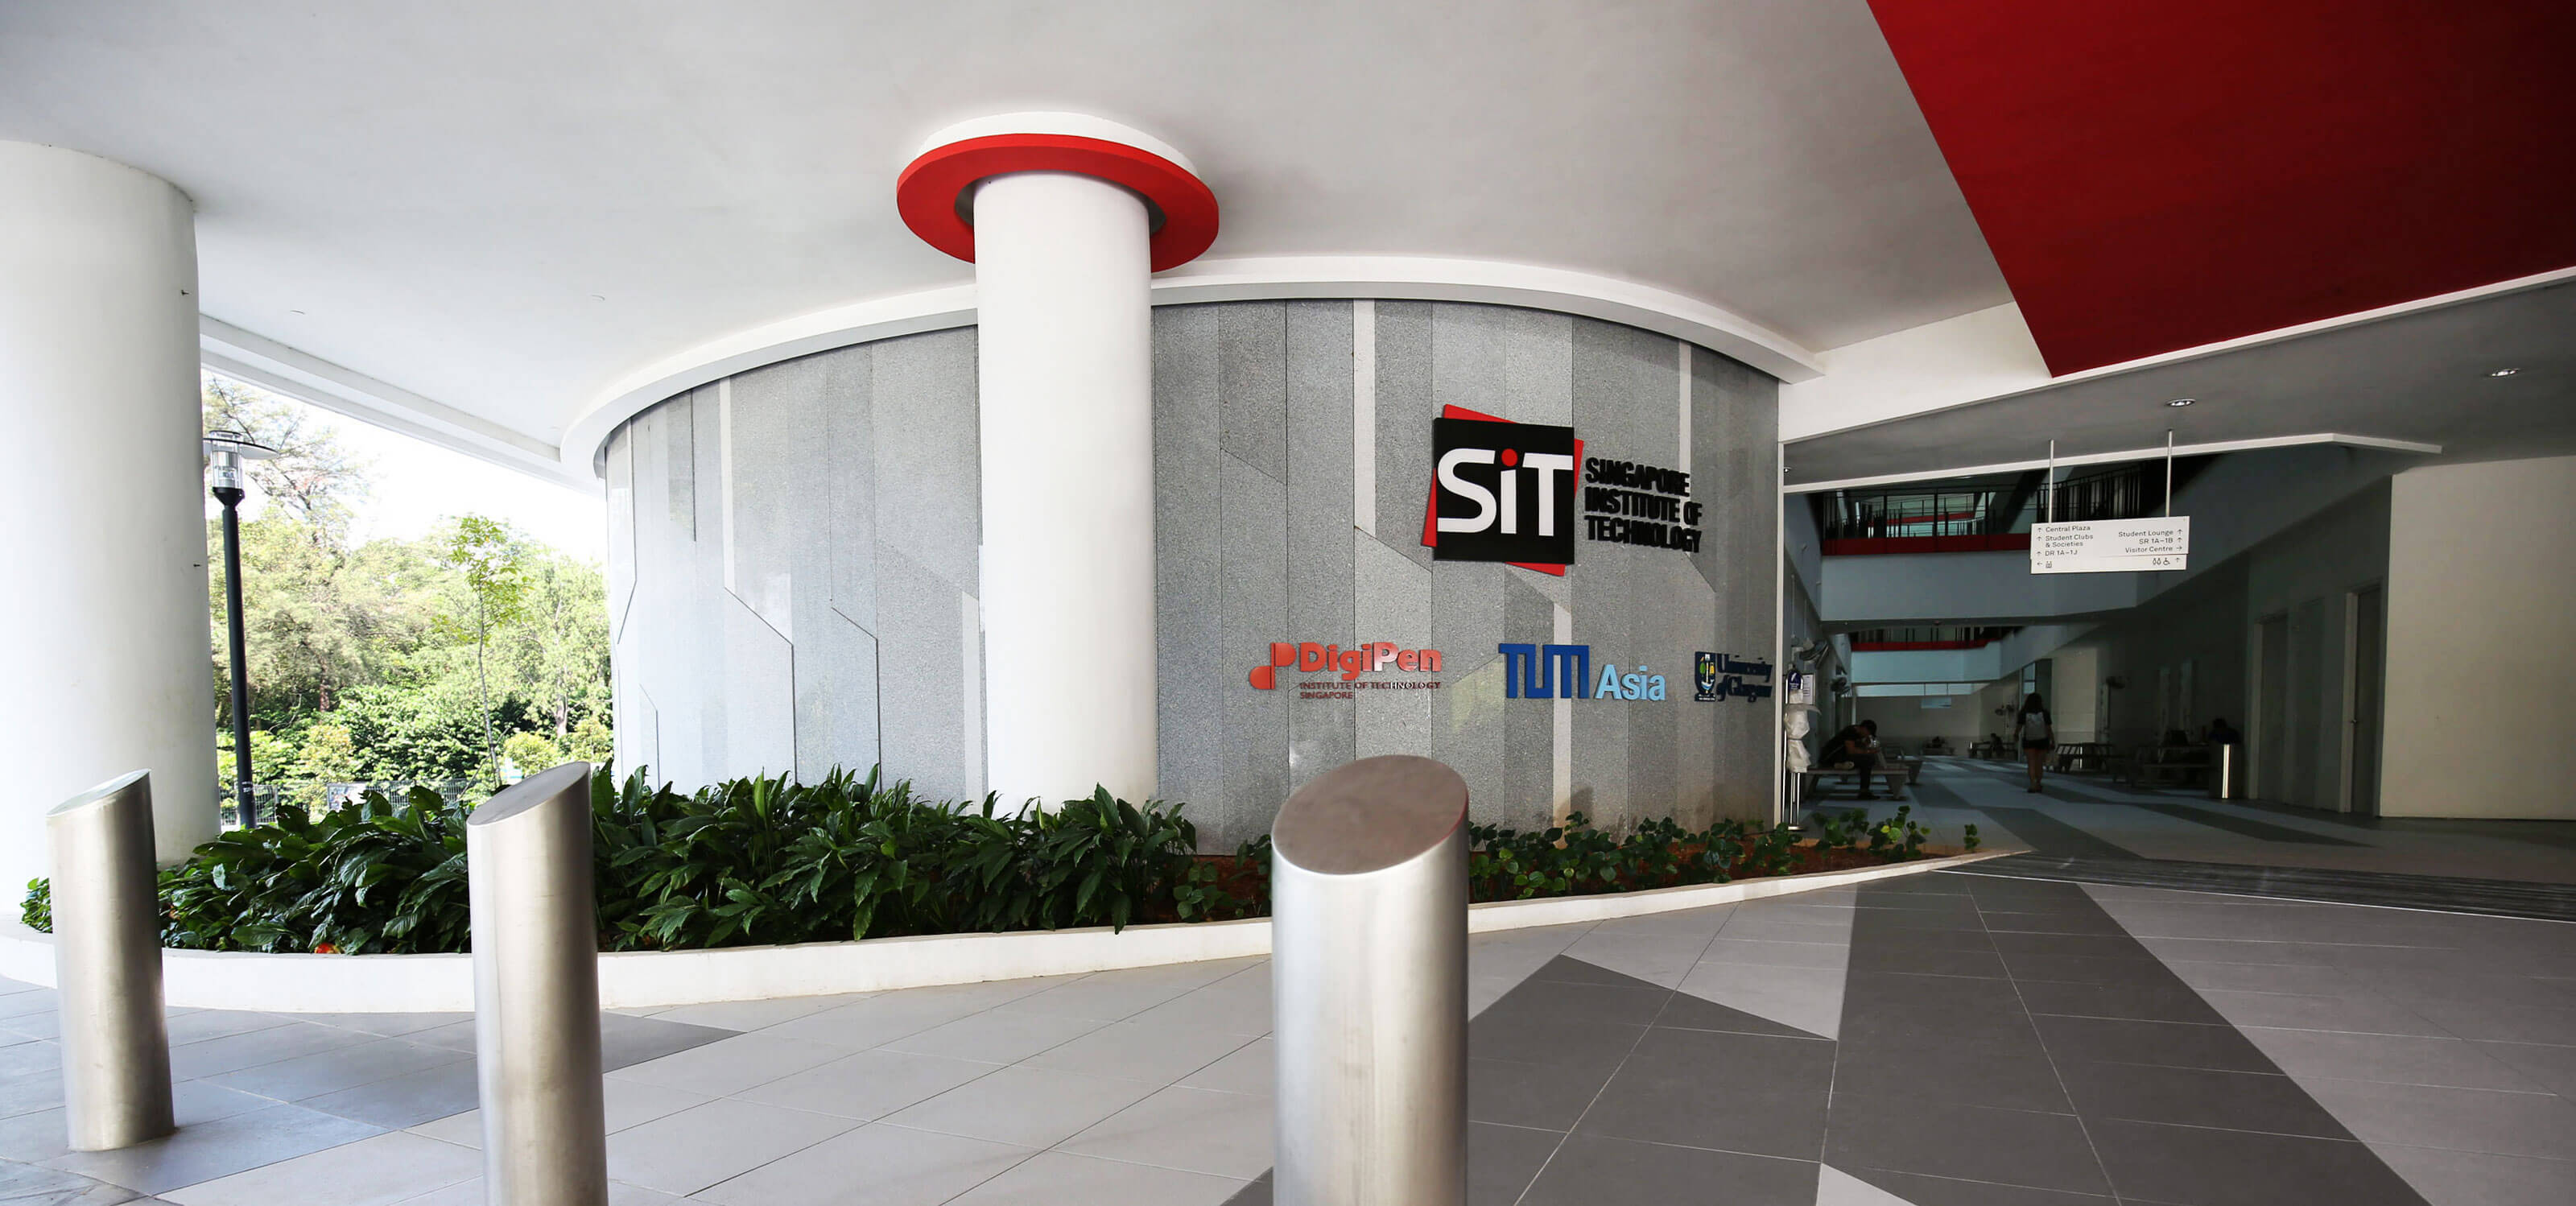 Ground floor exterior of a corporate building with signs for Singapore Institute of Technology, DigiPen, and others.